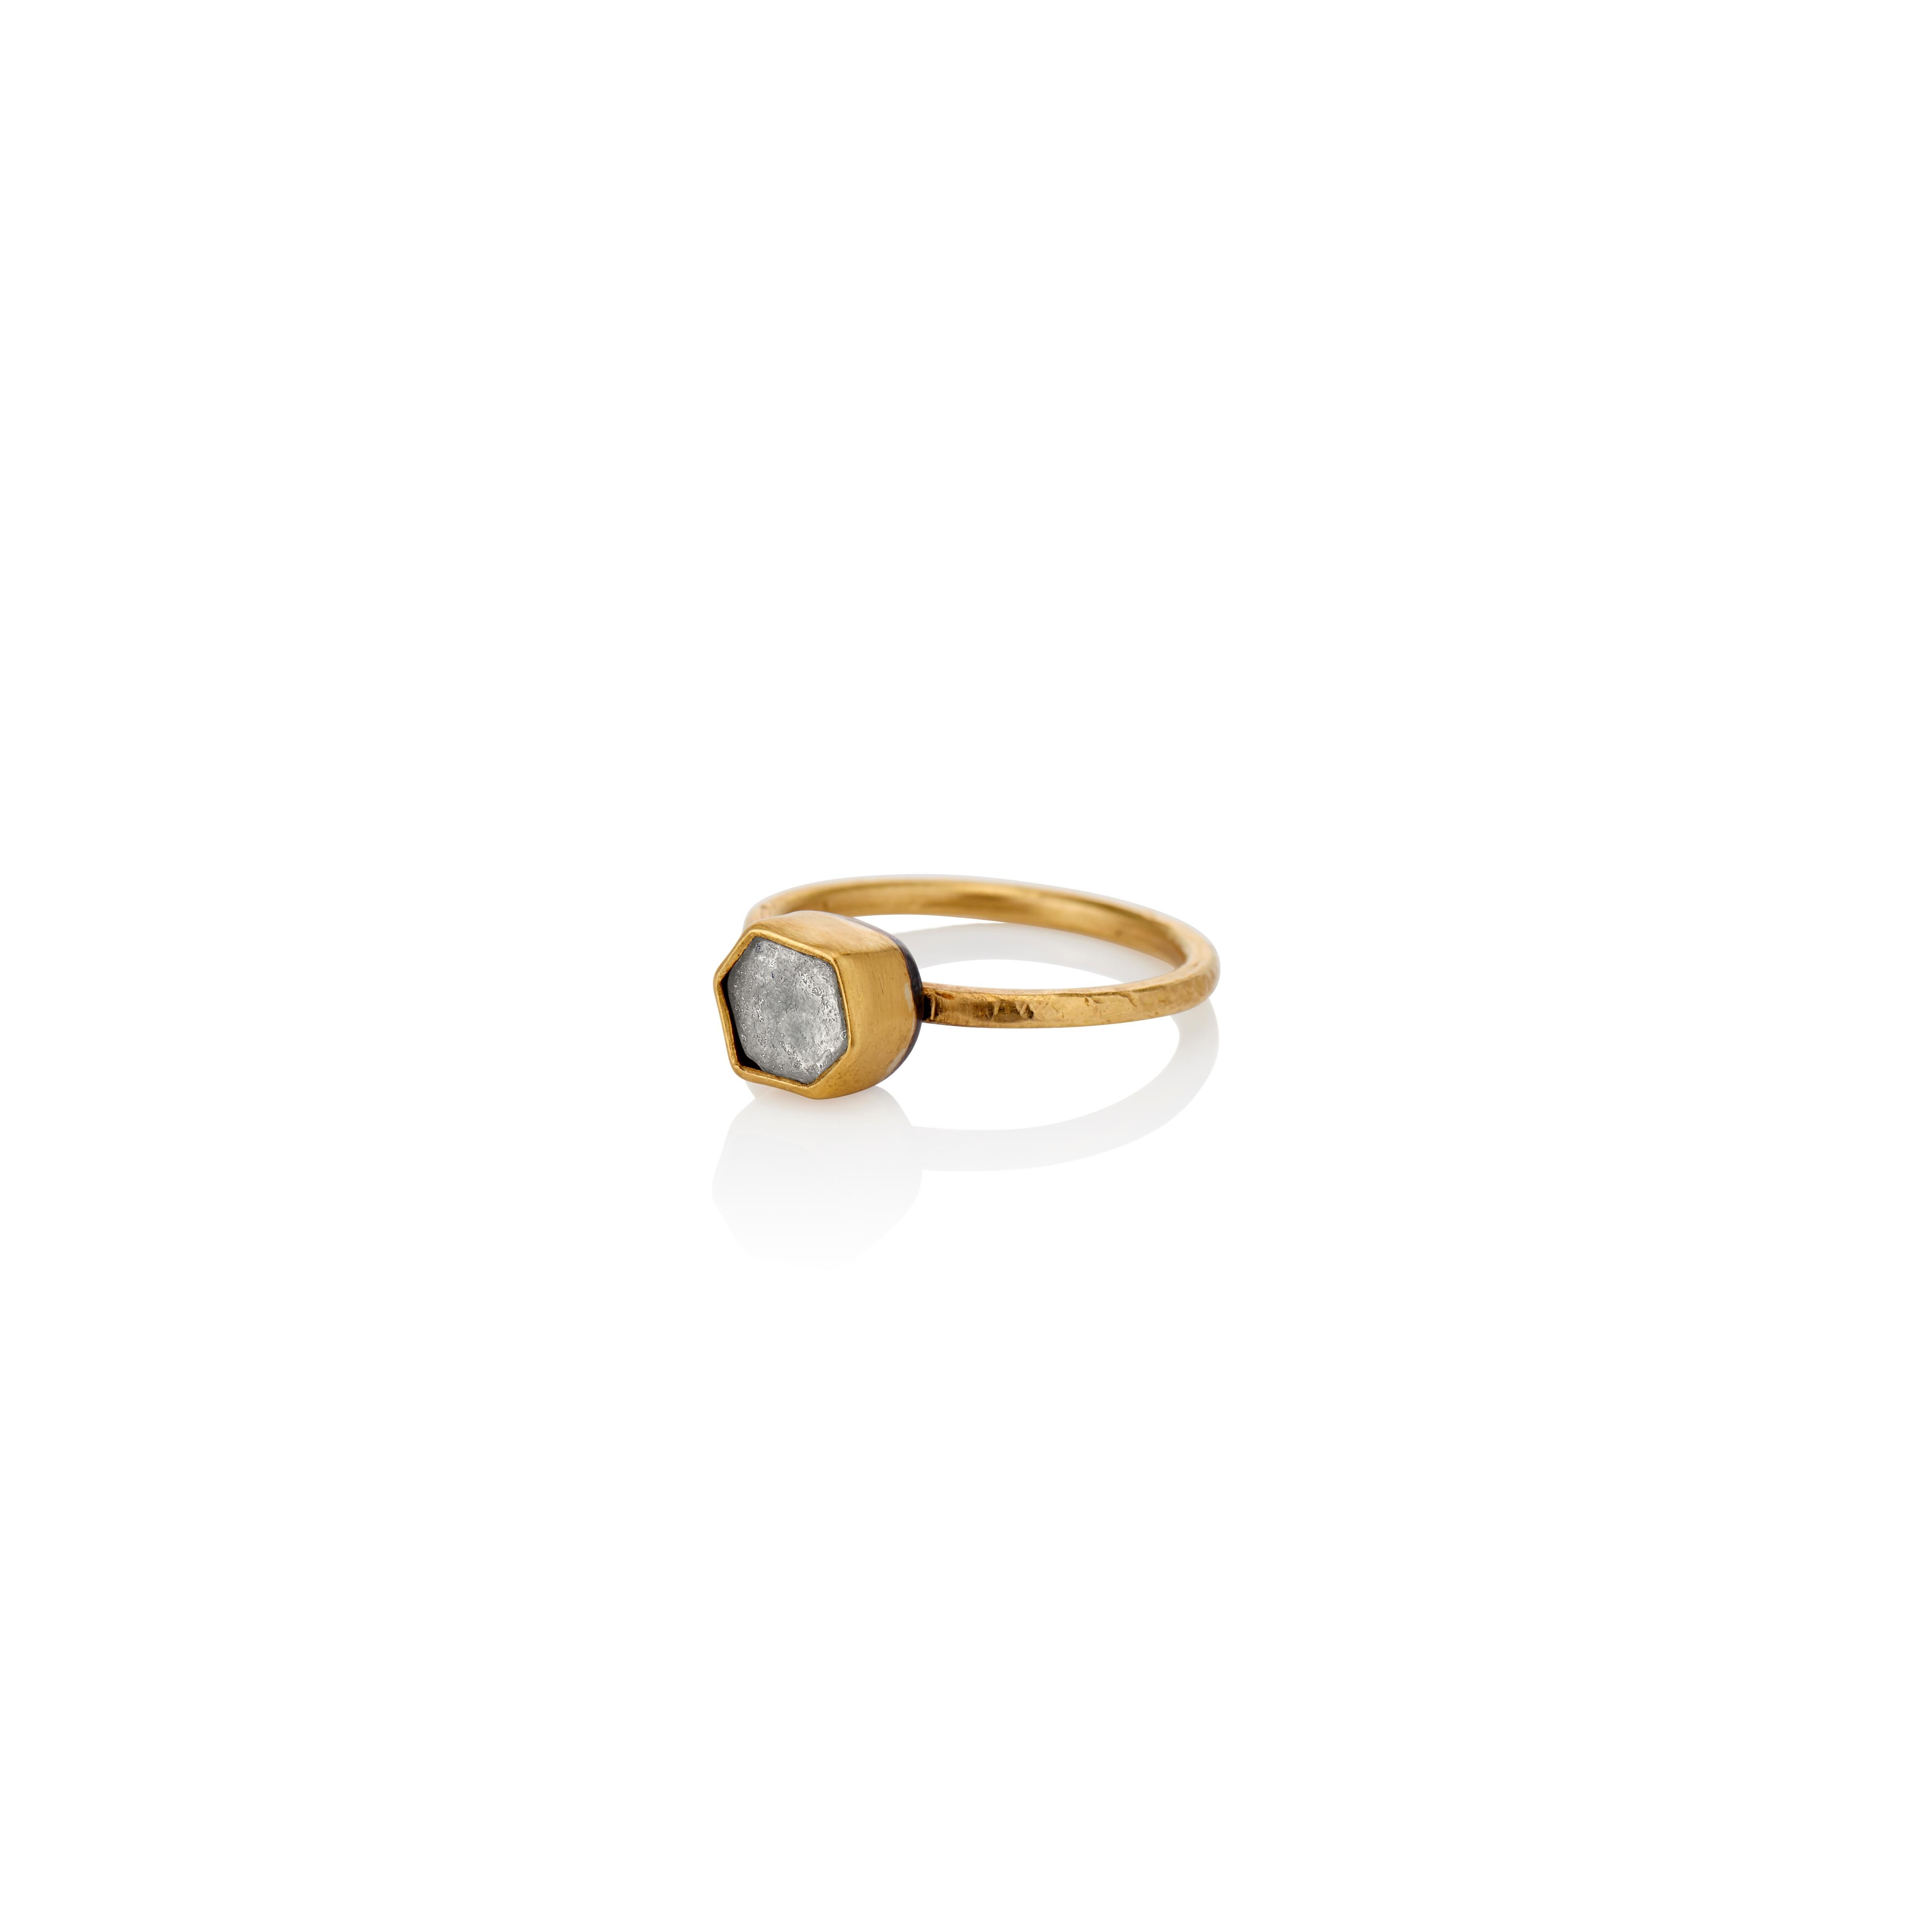 Heather gray sapphire rose cut crystal (1.33 carats) solitaire is encased in a 22 karat yellow gold bezel. The 1.5mm ring shank of 20 karat yellow gold is size 6.75.  The back sheet of the bezel is made in Sterling silver and oxidized to lend the